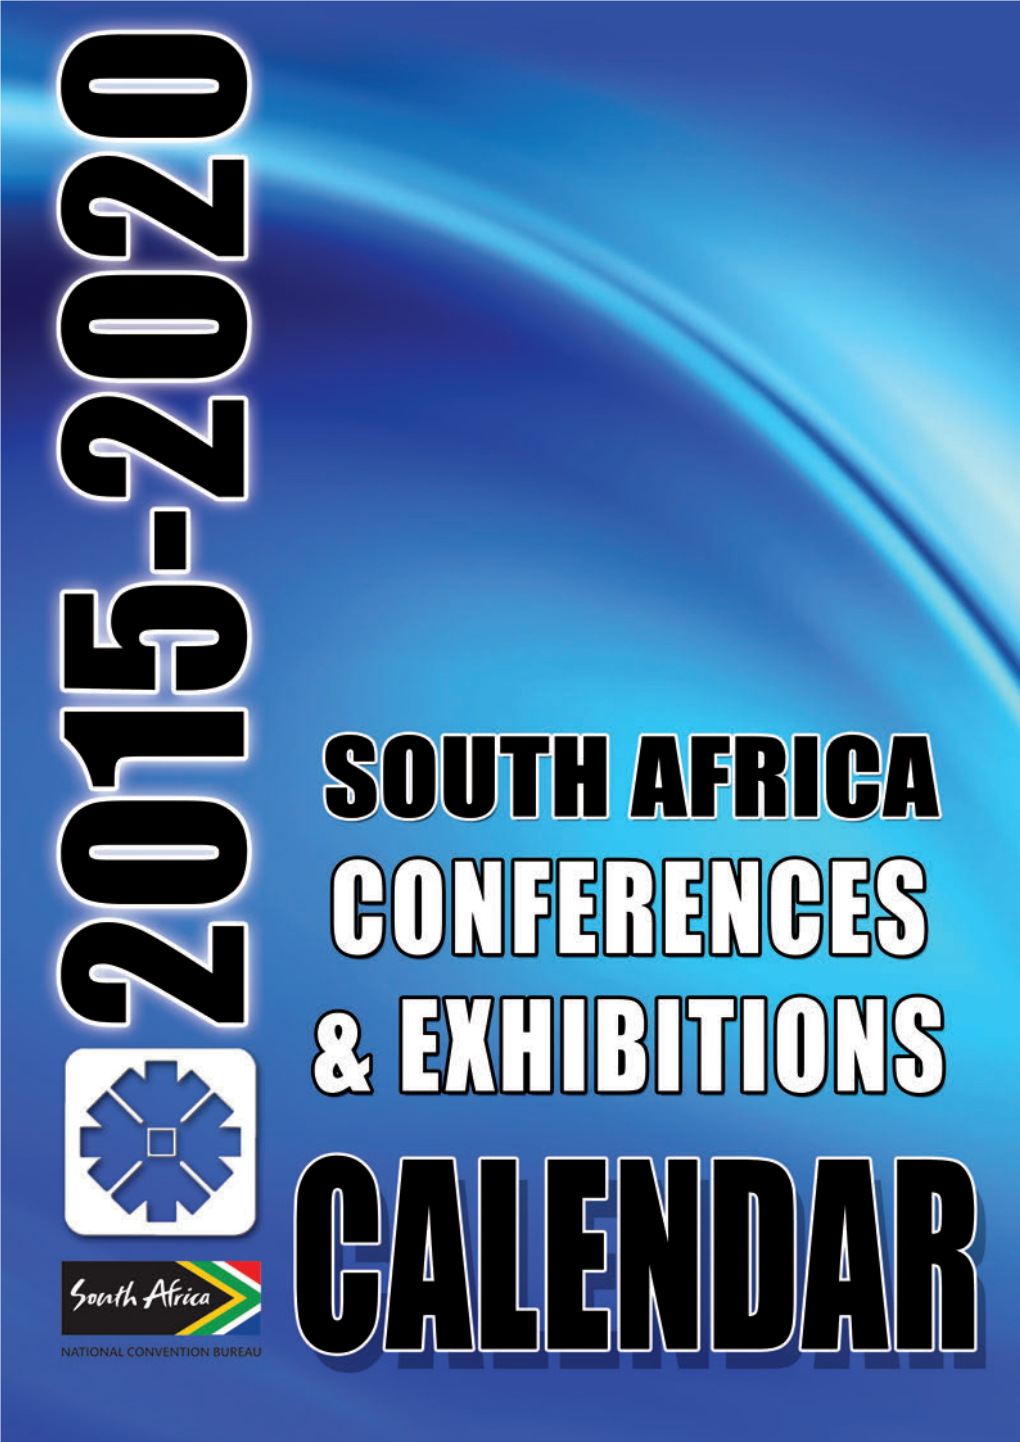 Calendar of Exhibitions to Be Held in South Africa 2015 – 2016